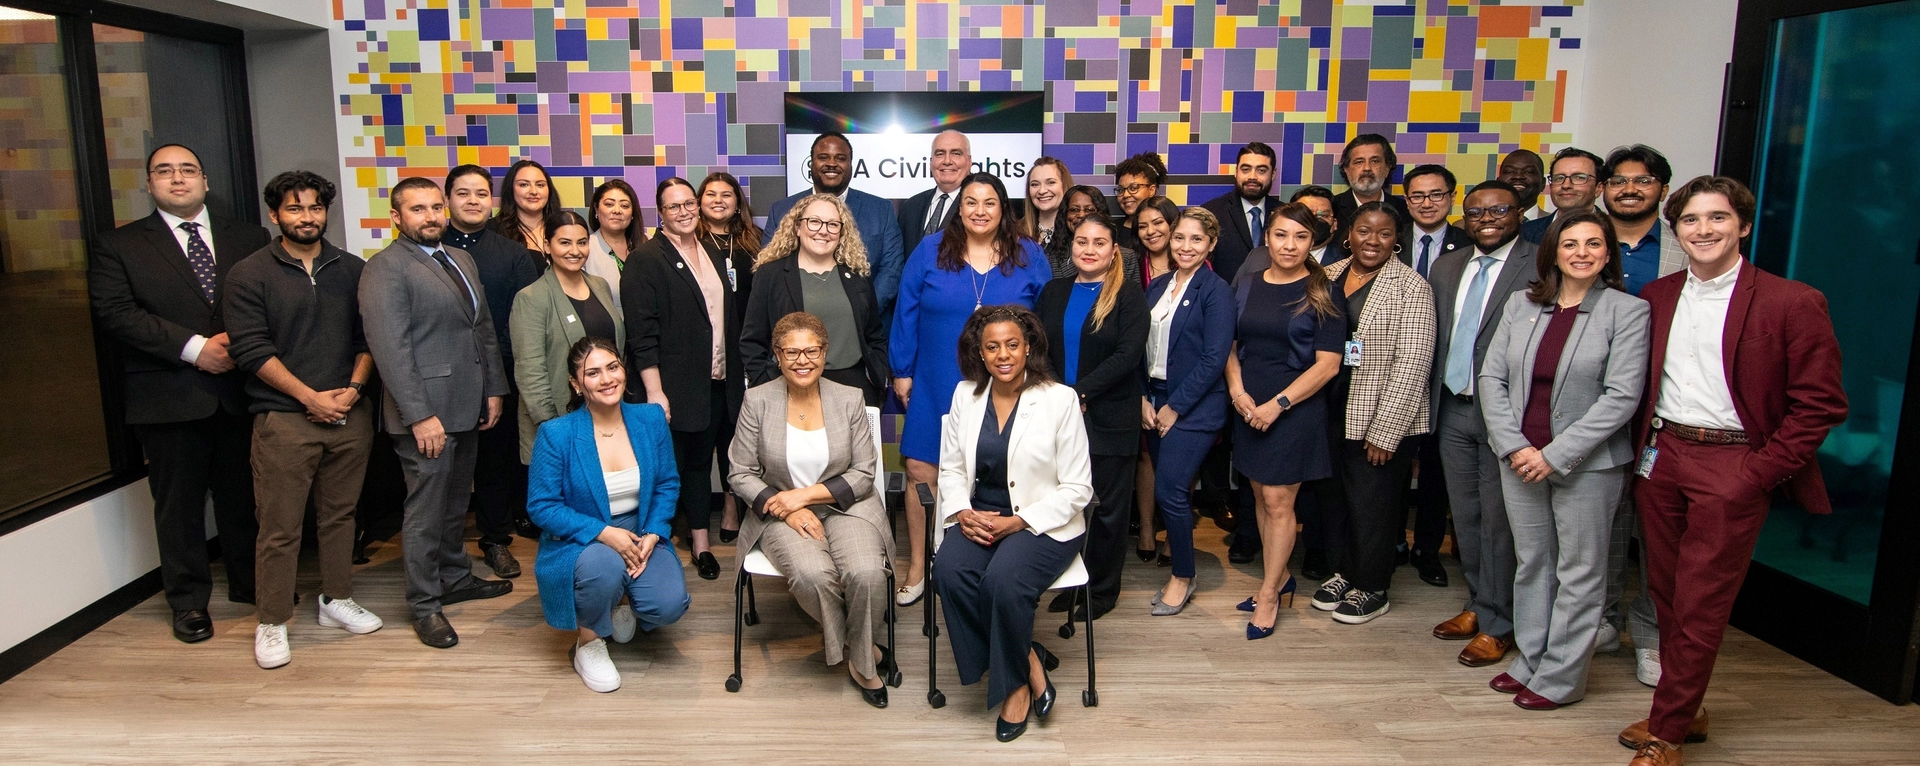 Los Angeles Mayor Karen Bass and the staff of LA Civil Rights